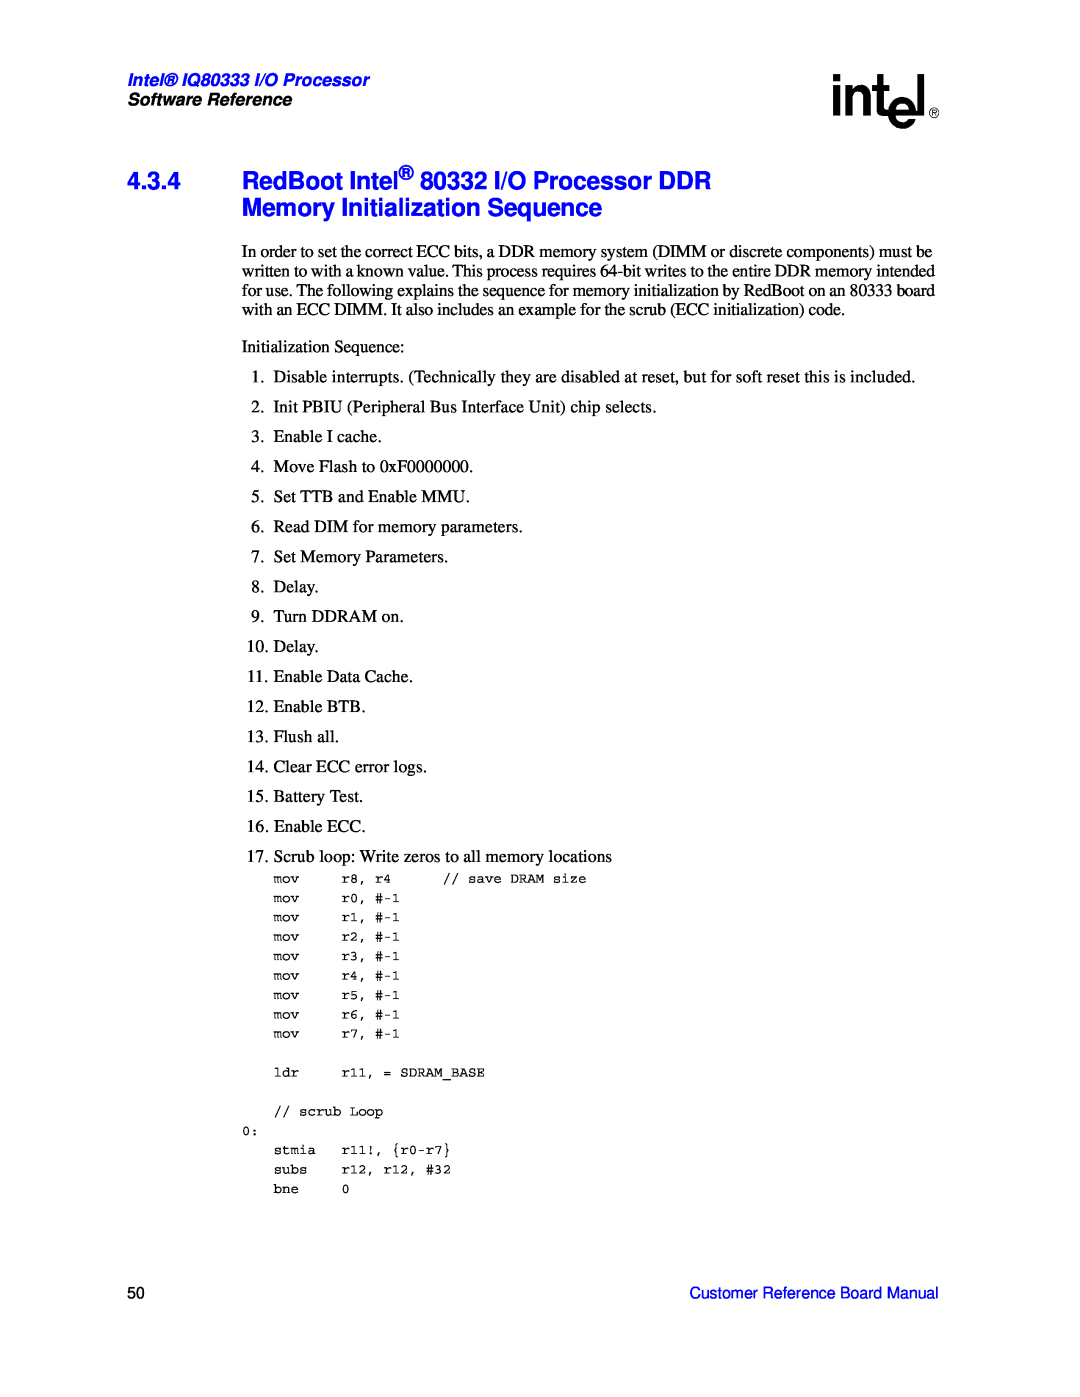 Intel manual Intel IQ80333 I/O Processor, Software Reference, Initialization Sequence 